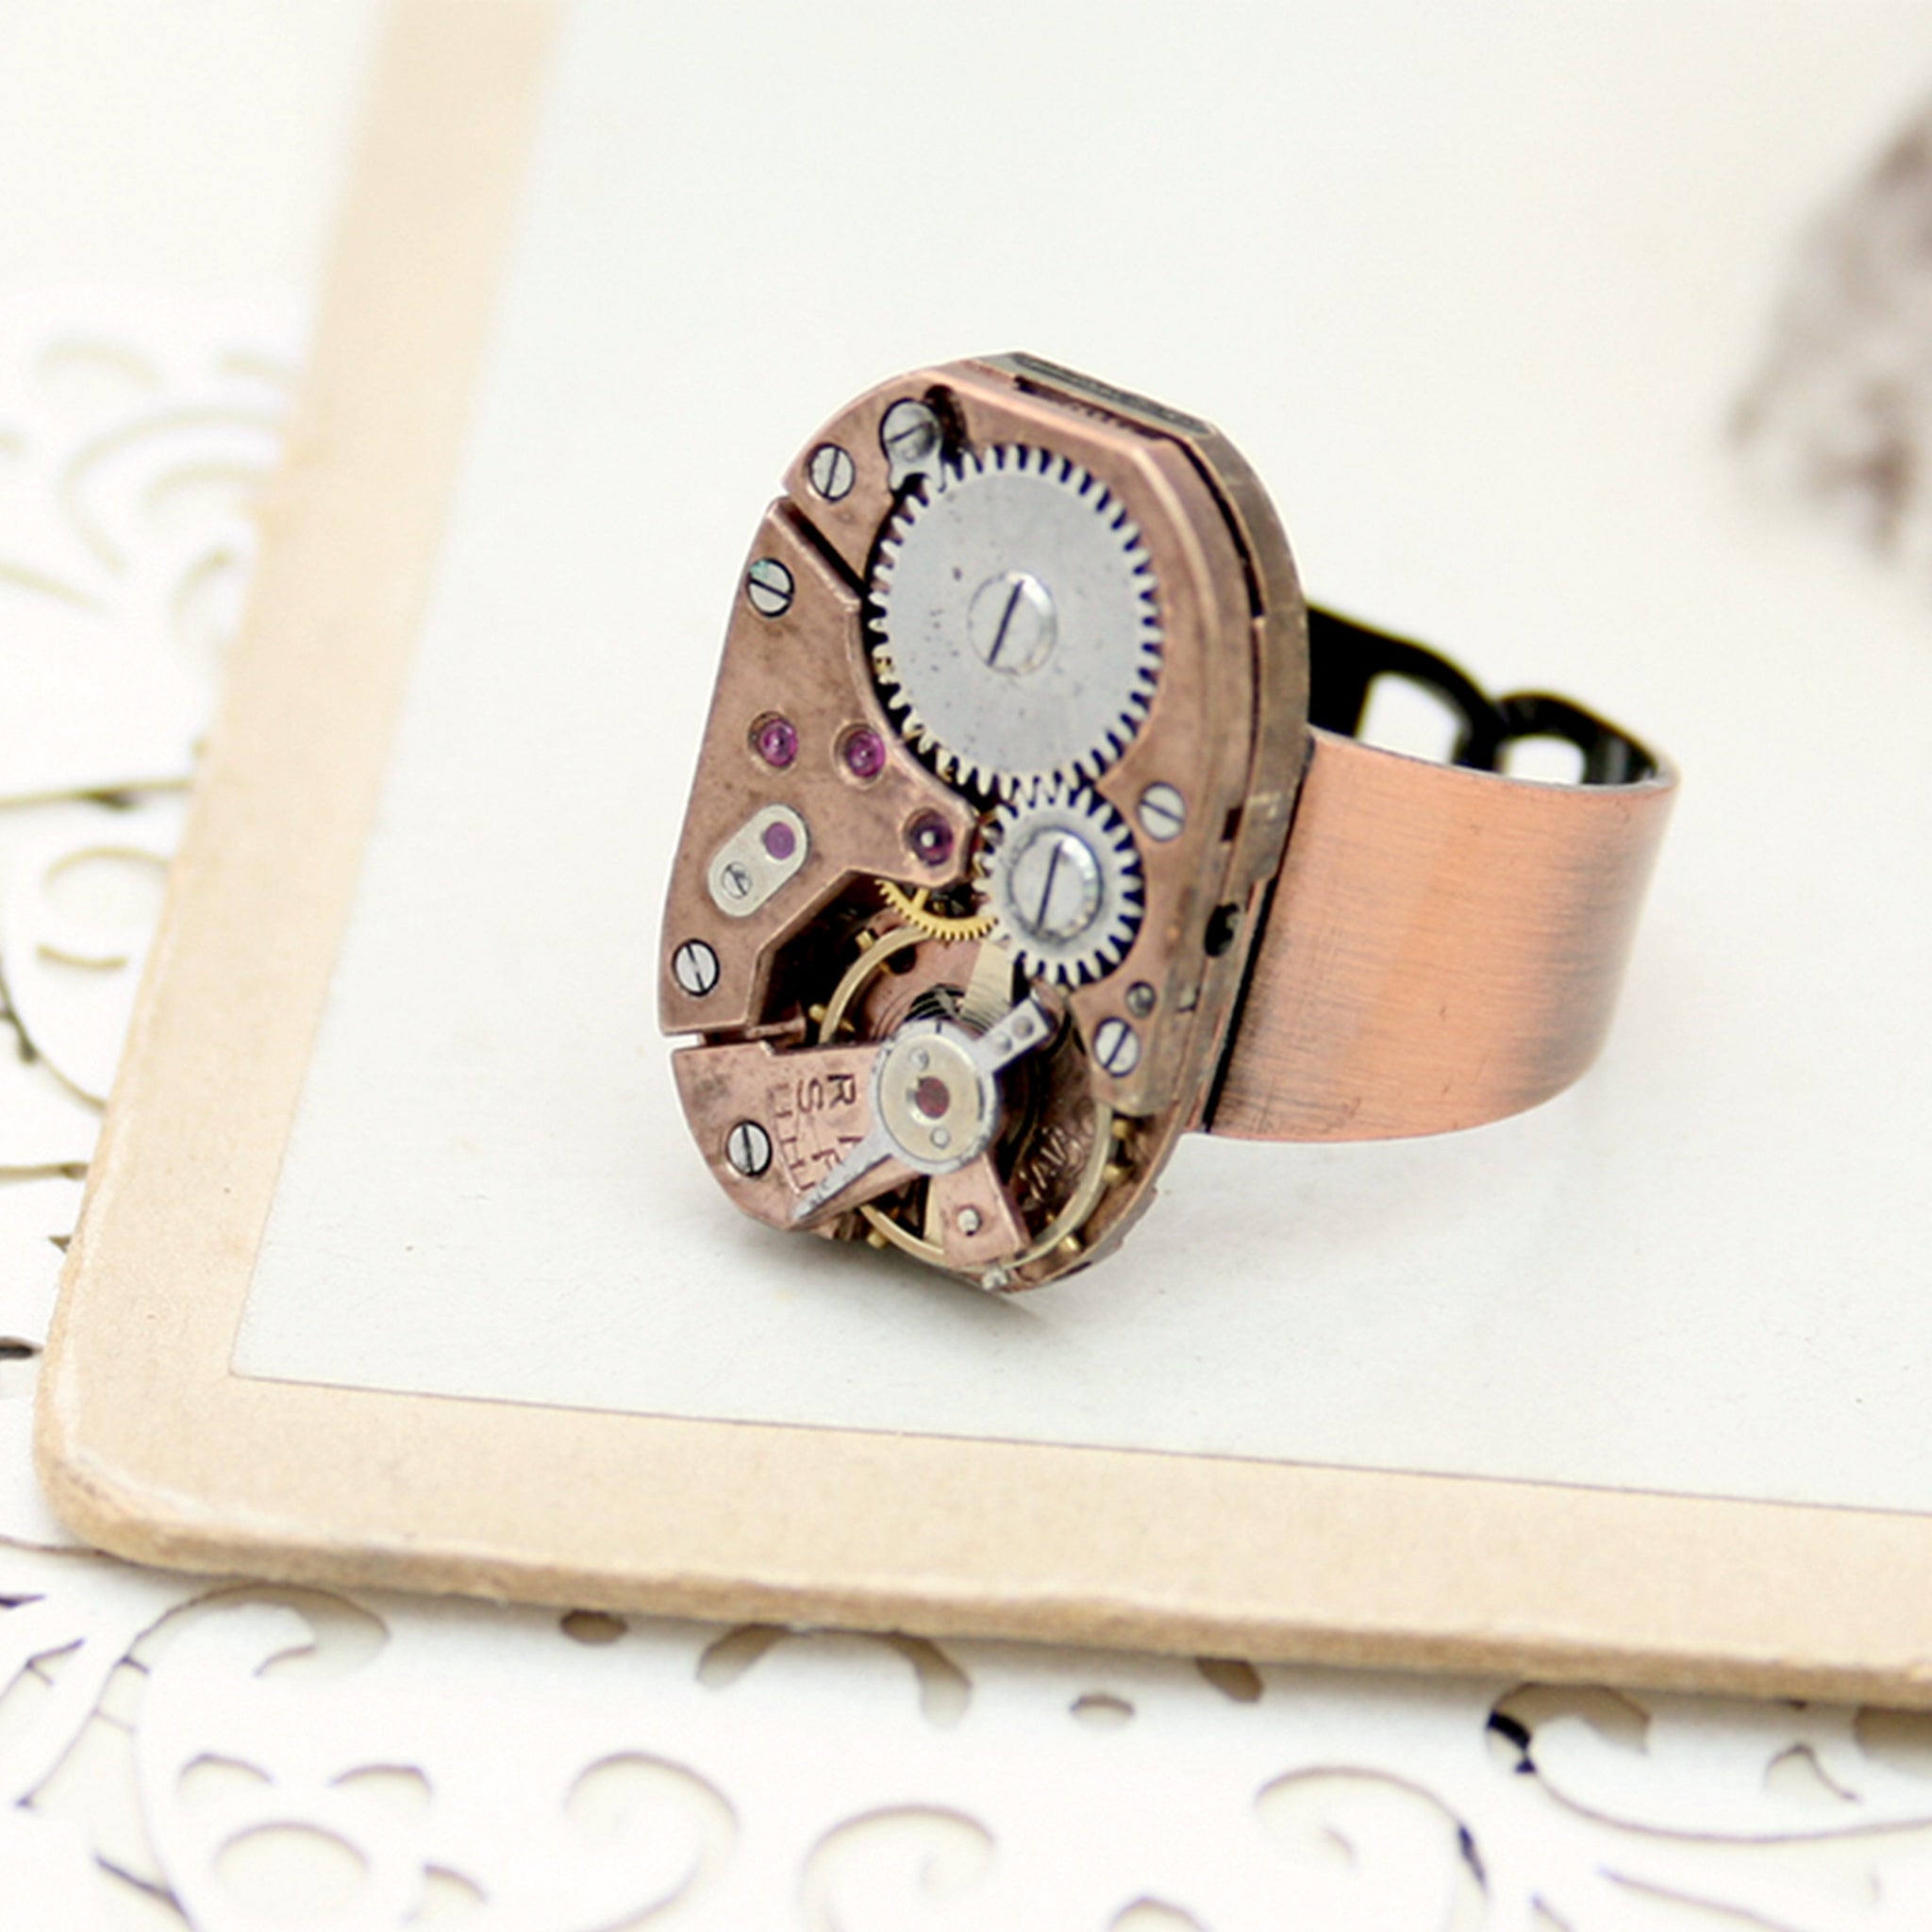 Steampunk Watch with a leather bracelet from Lullis Craft. – Steampunk  StuffI